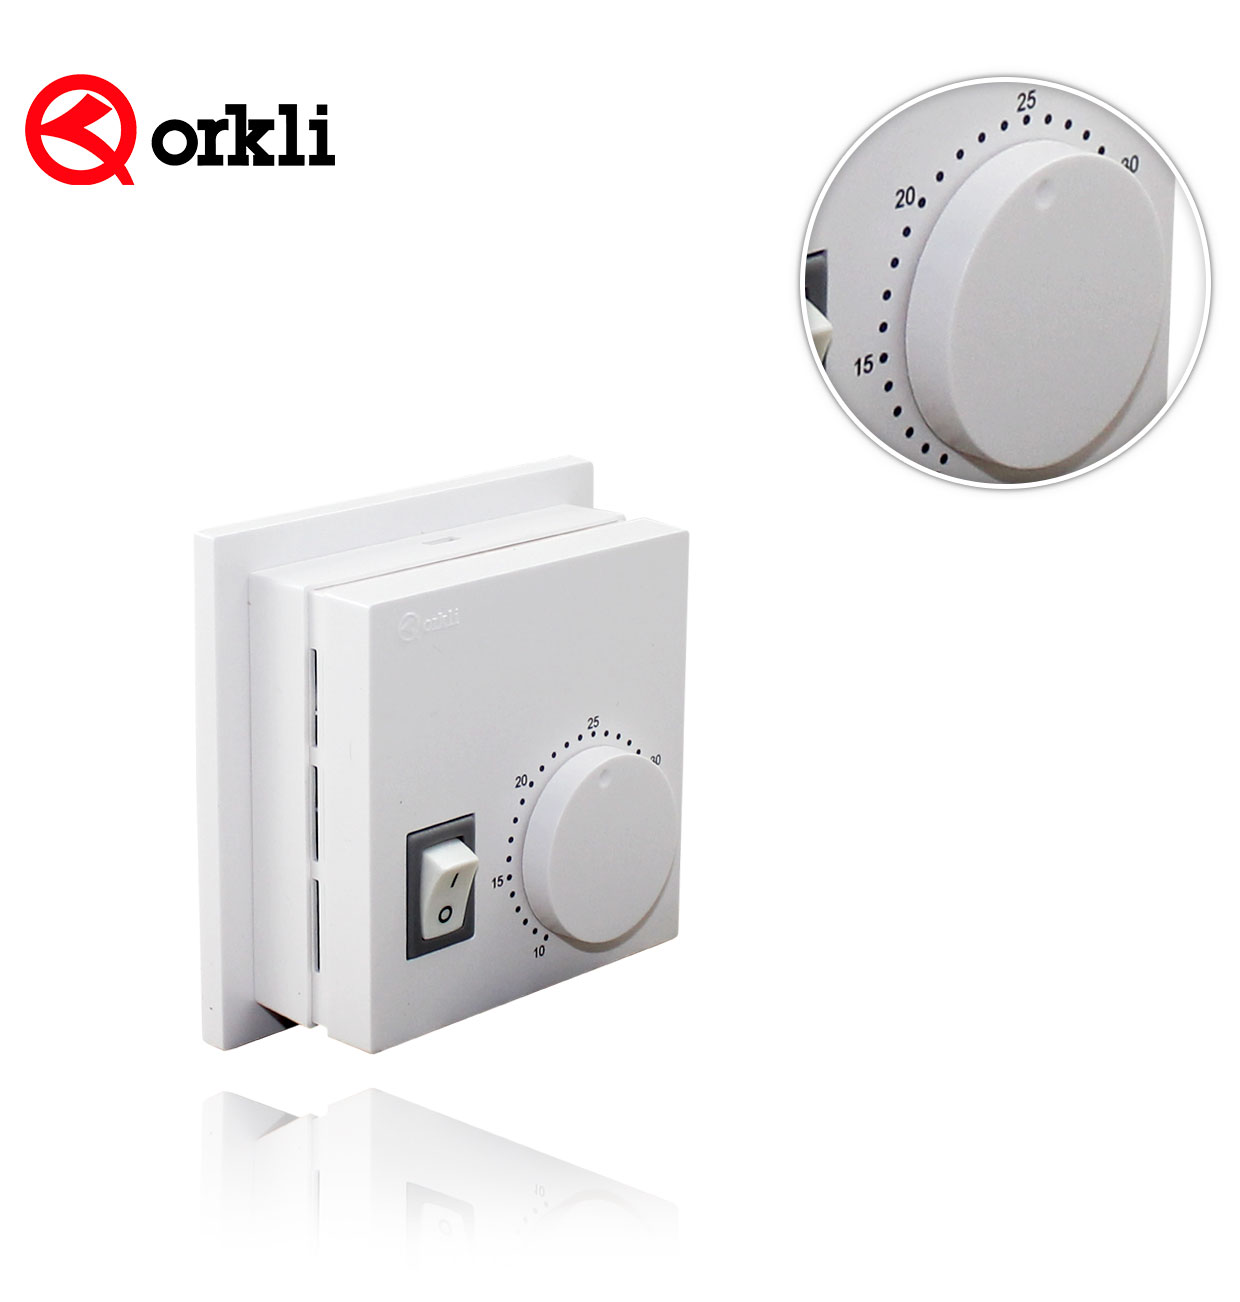 ORKLI ON/OFF AMBIENT THERMOSTAT